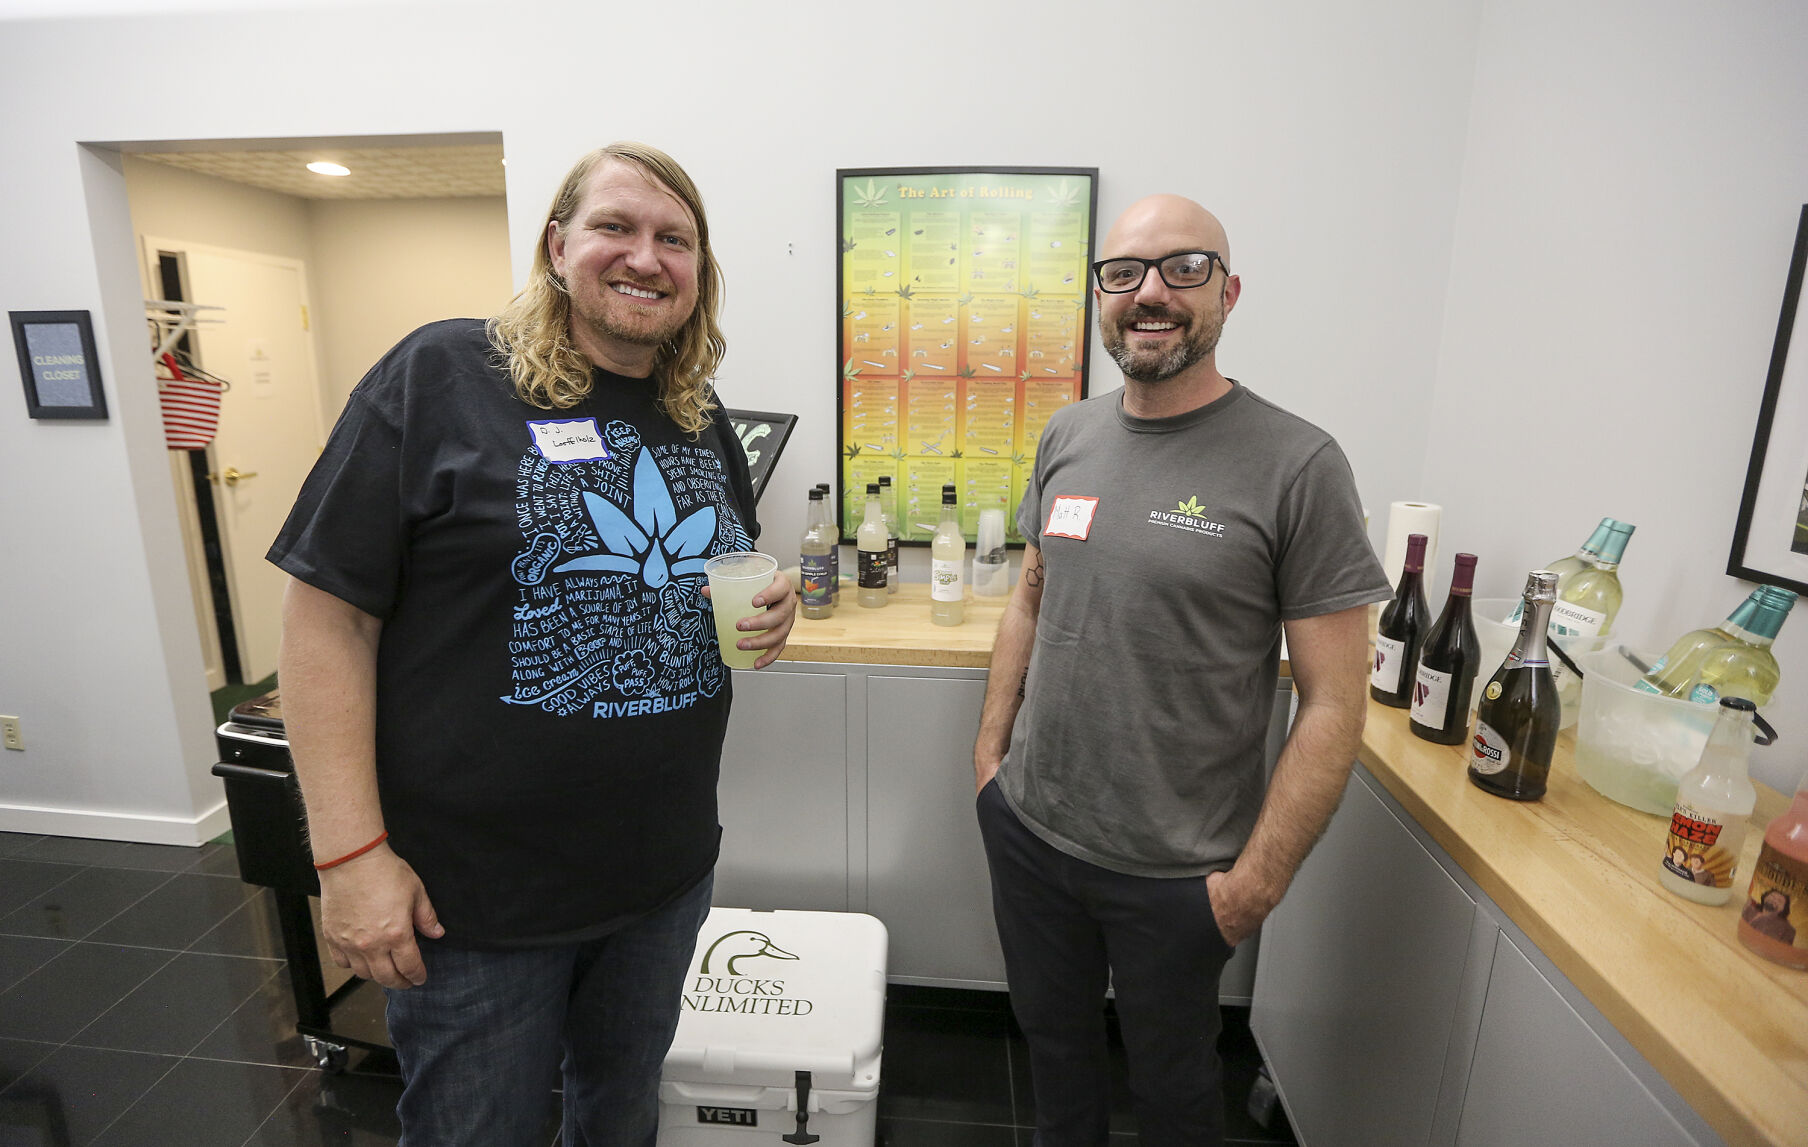 Co-owner of RiverBluff D.J. Leoffelholz (left) along with store manager Matt Rheault during a Business After Hours event held at RiverBluff’s headquarters in Dubuque.    PHOTO CREDIT: Dave Kettering